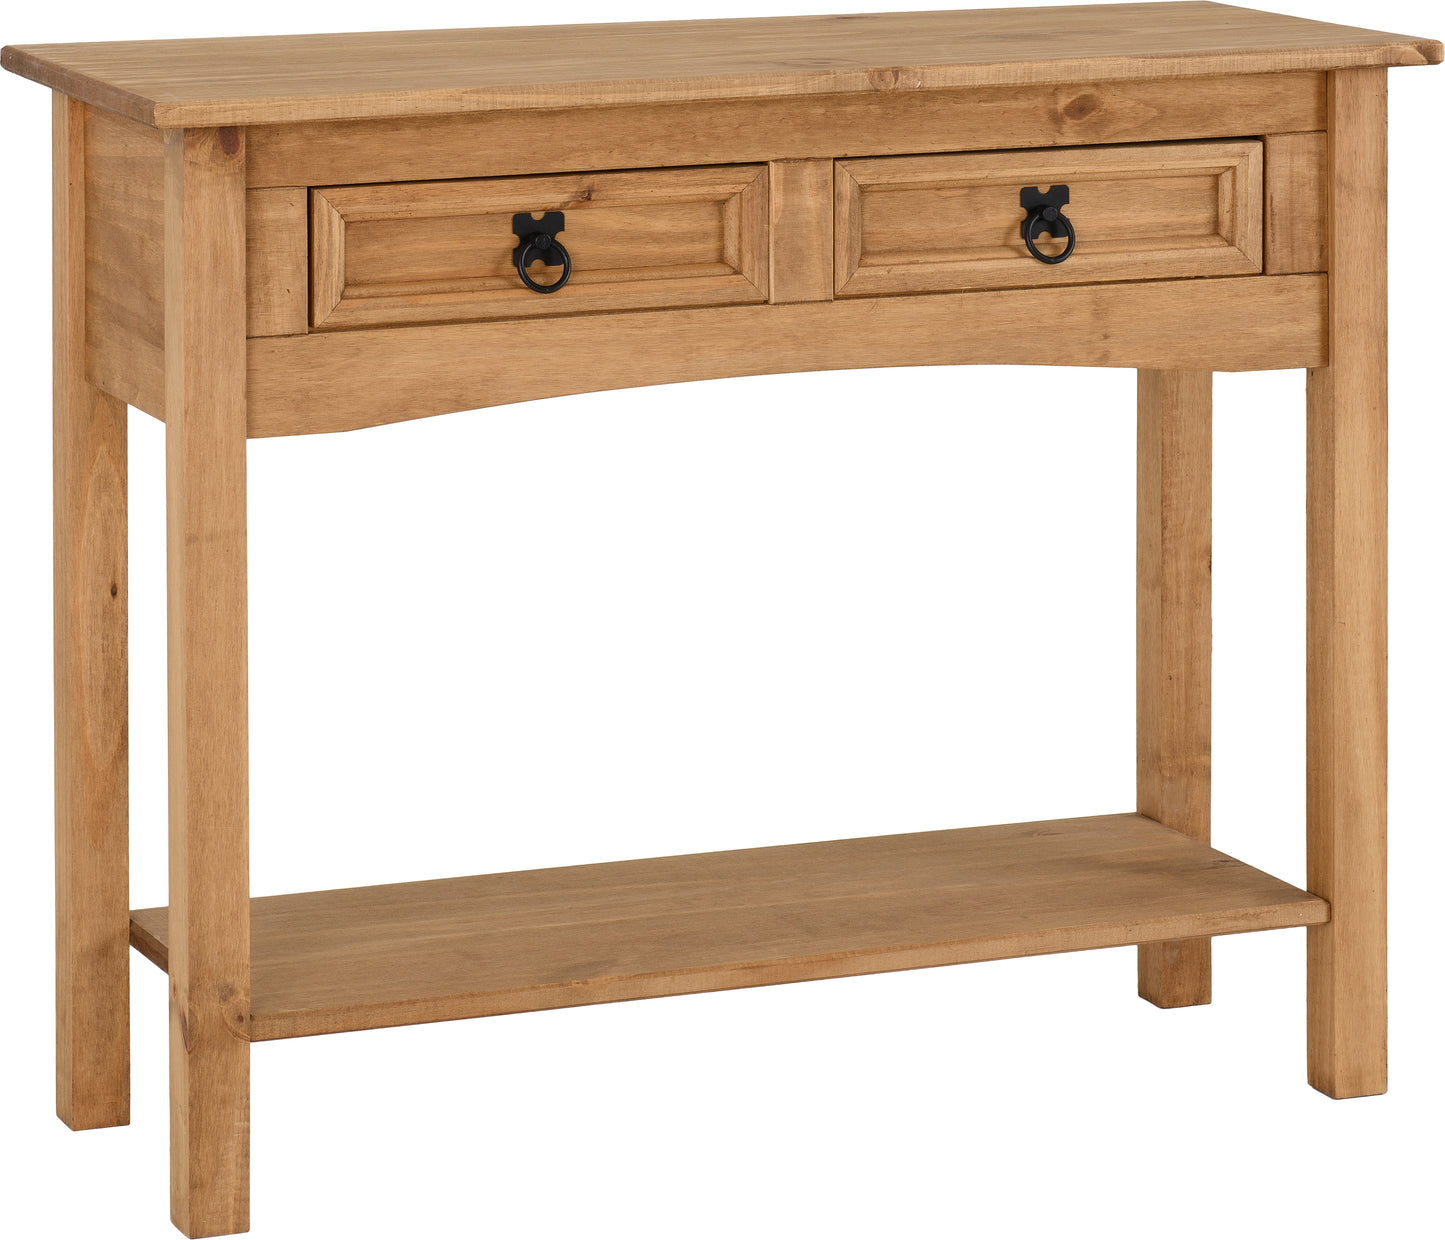 CORONA 2 DRAWER CONSOLE TABLE WITH SHELF - DISTRESSED WAXED PINE